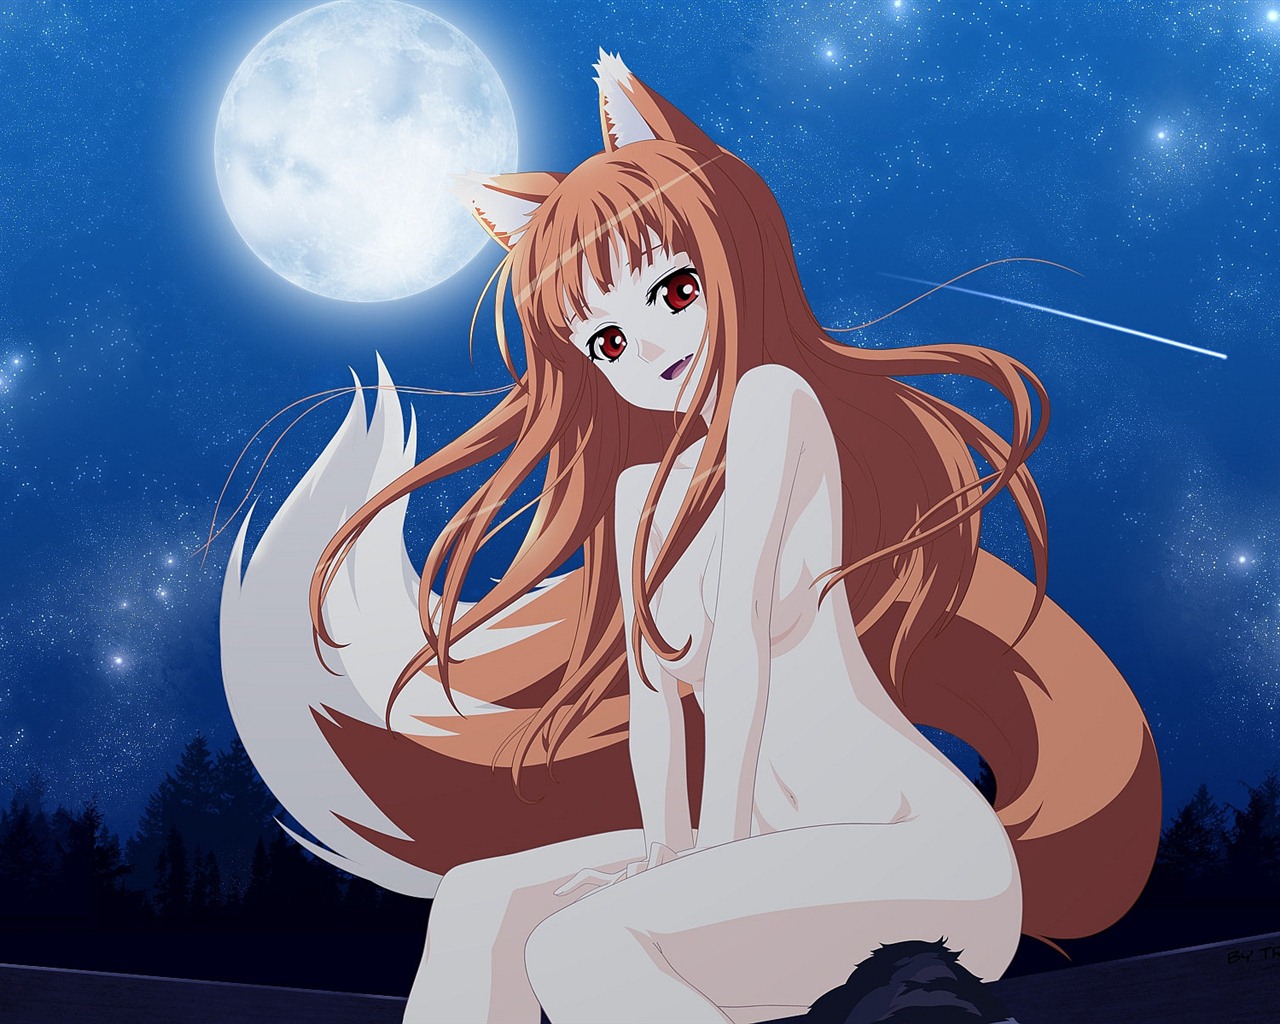 Spice and Wolf HD wallpapers #7 - 1280x1024